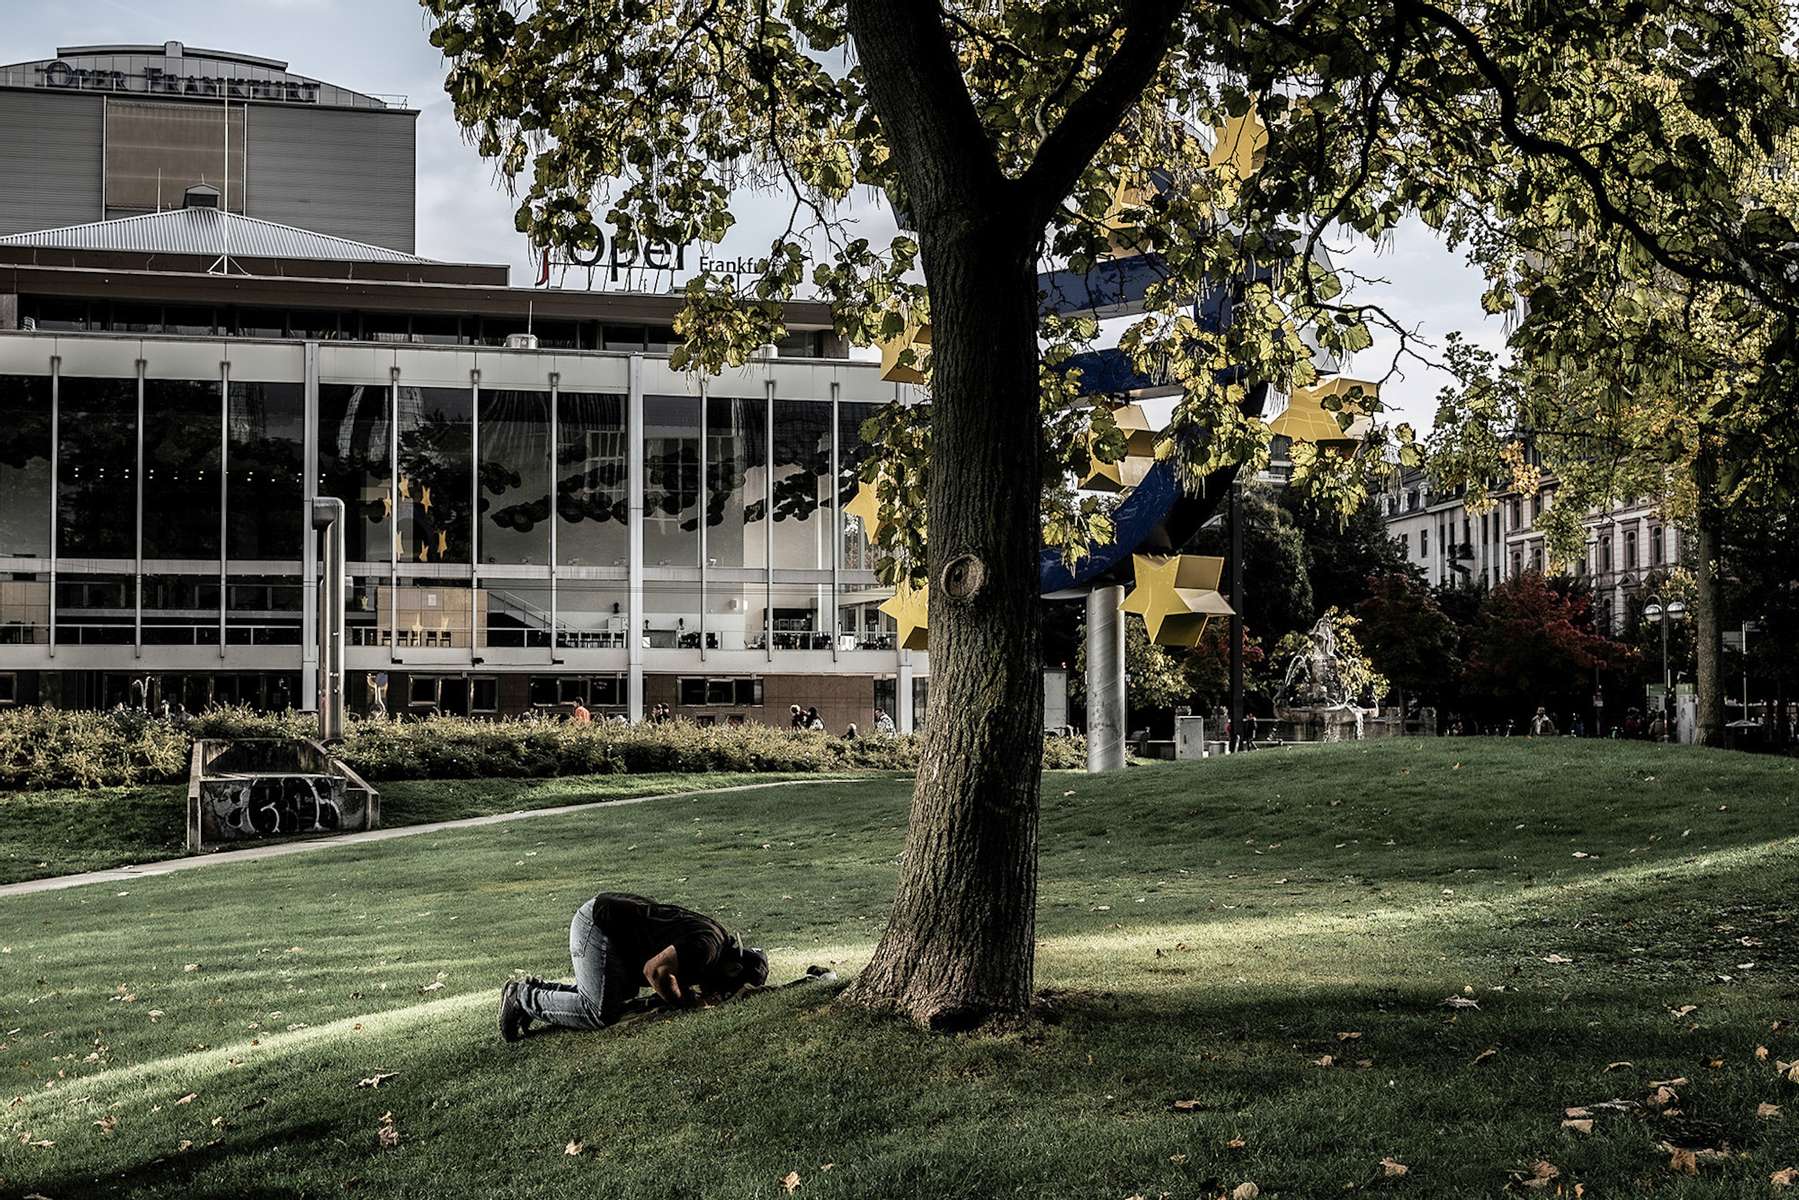 In the afternoon a muslim man is praying under a tree in downtown Frankfurt